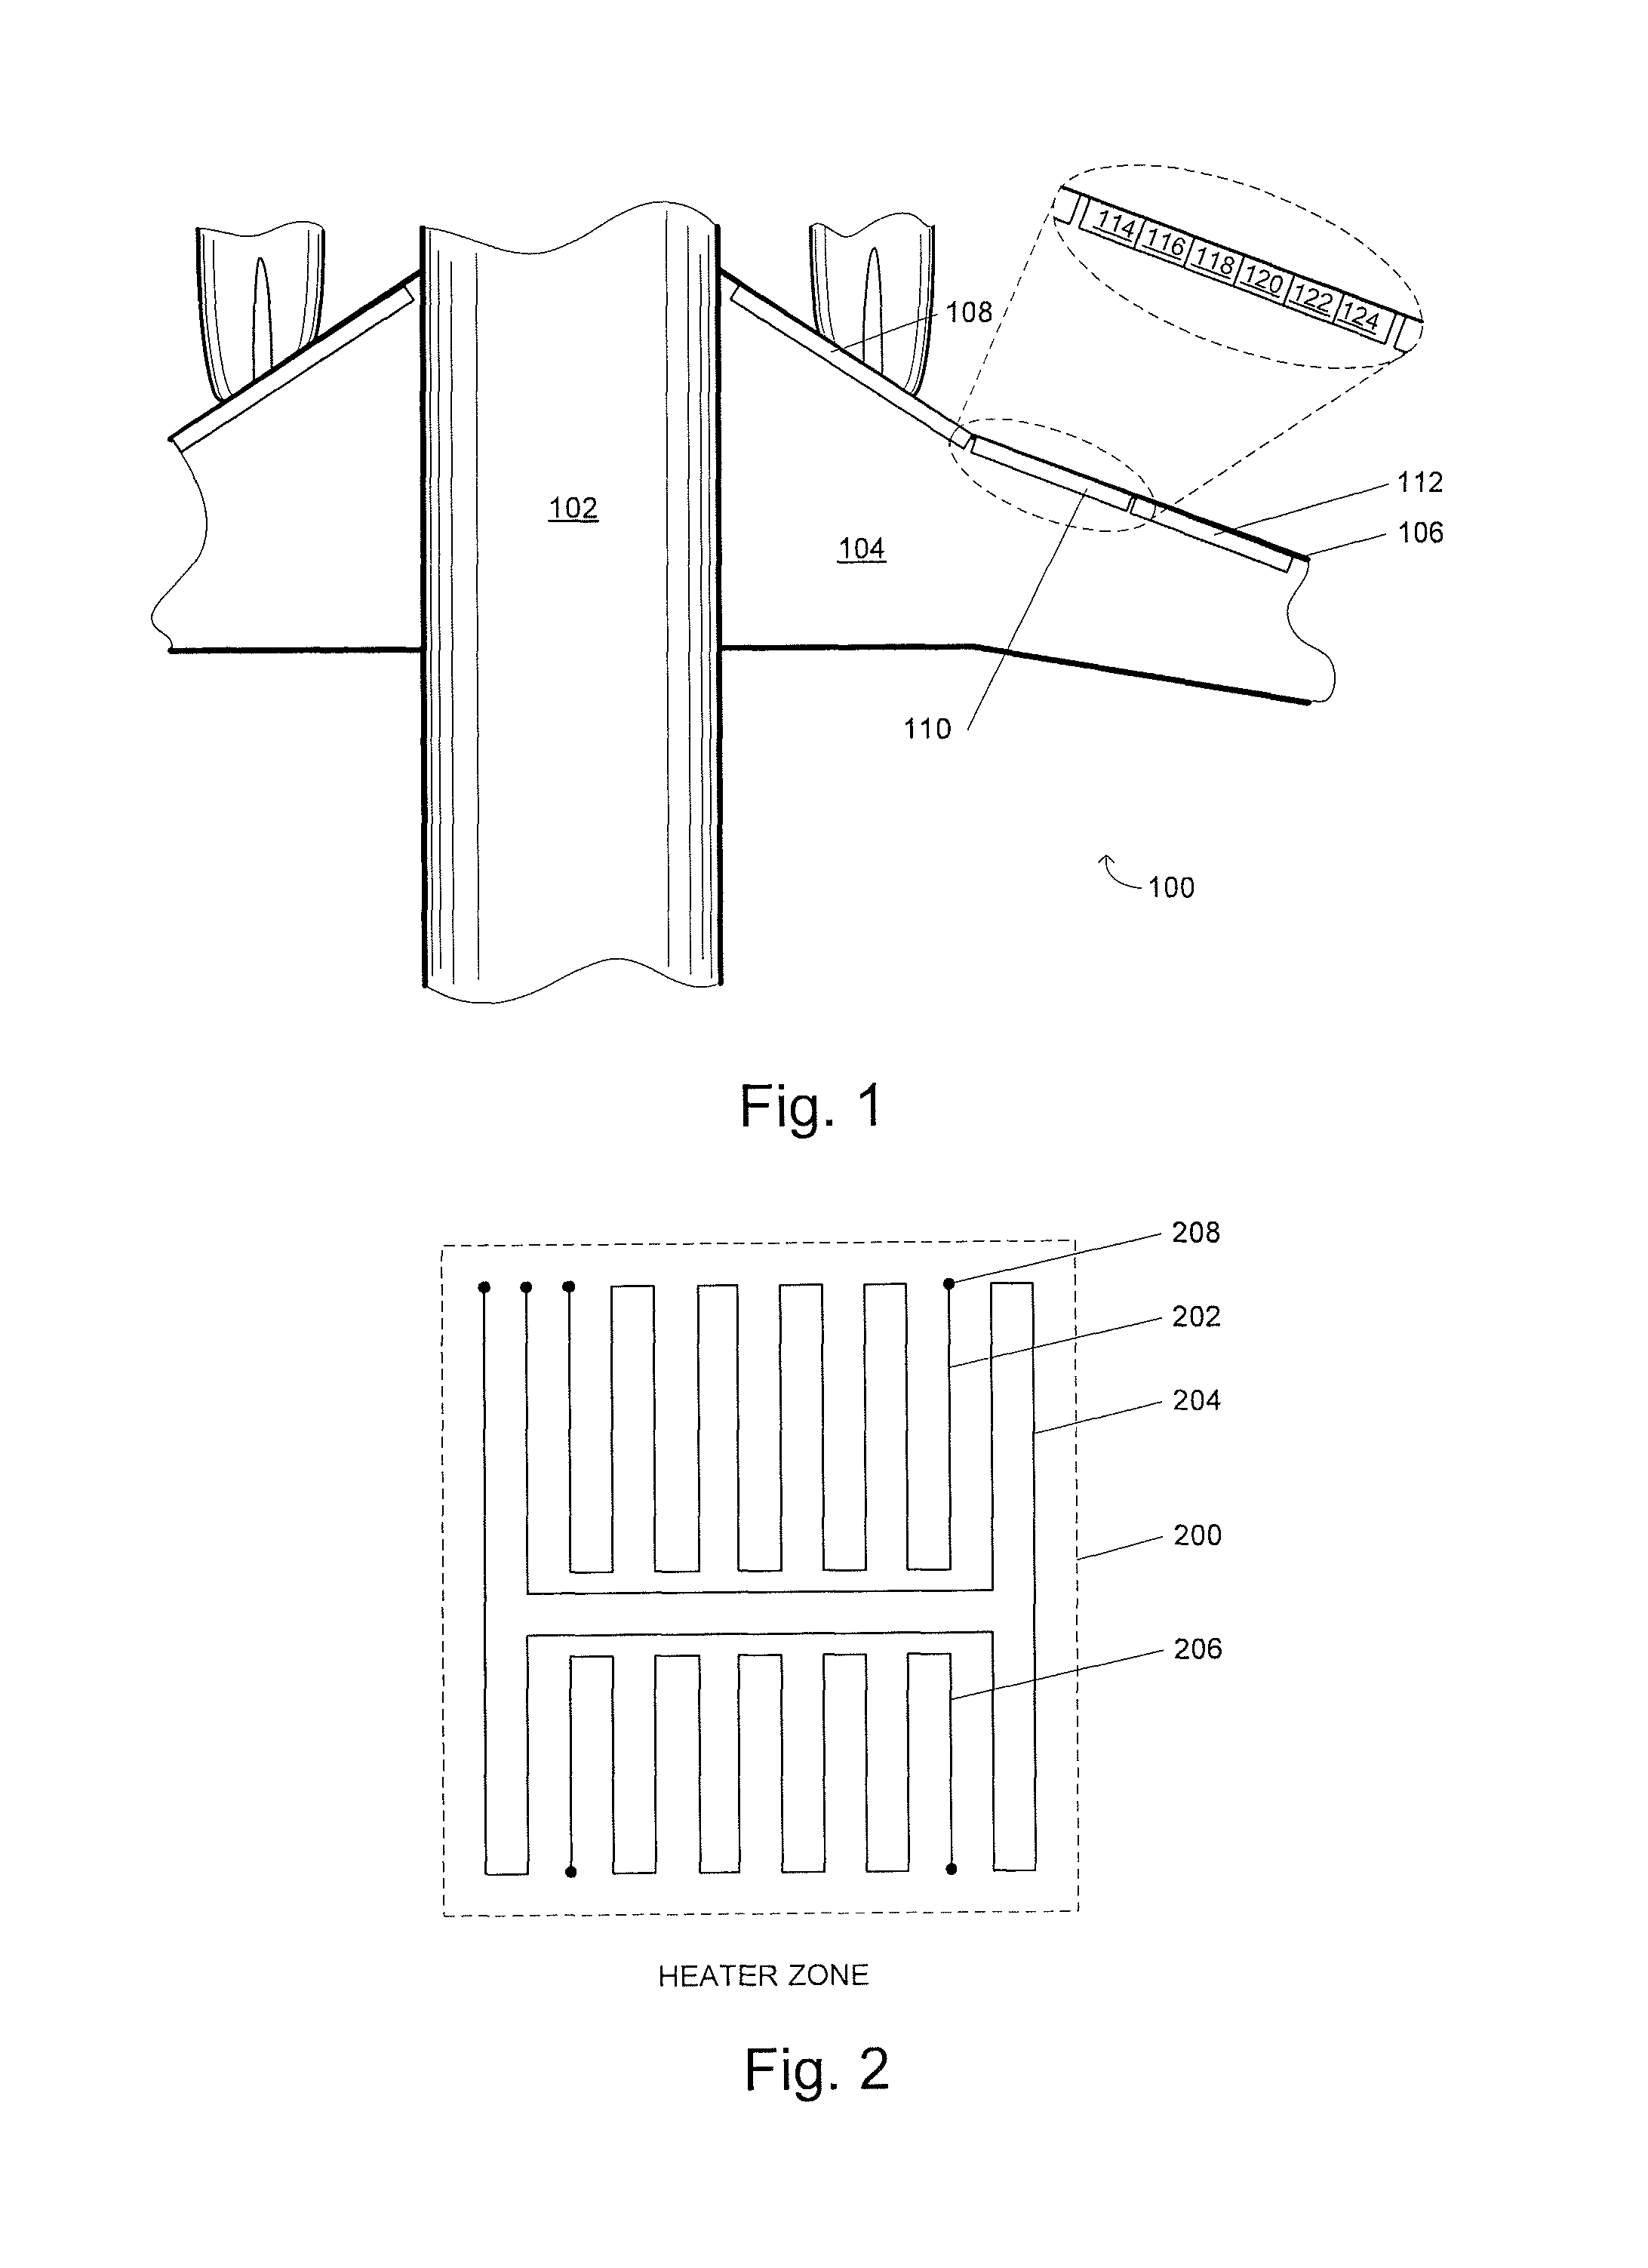 Ice detection system and method